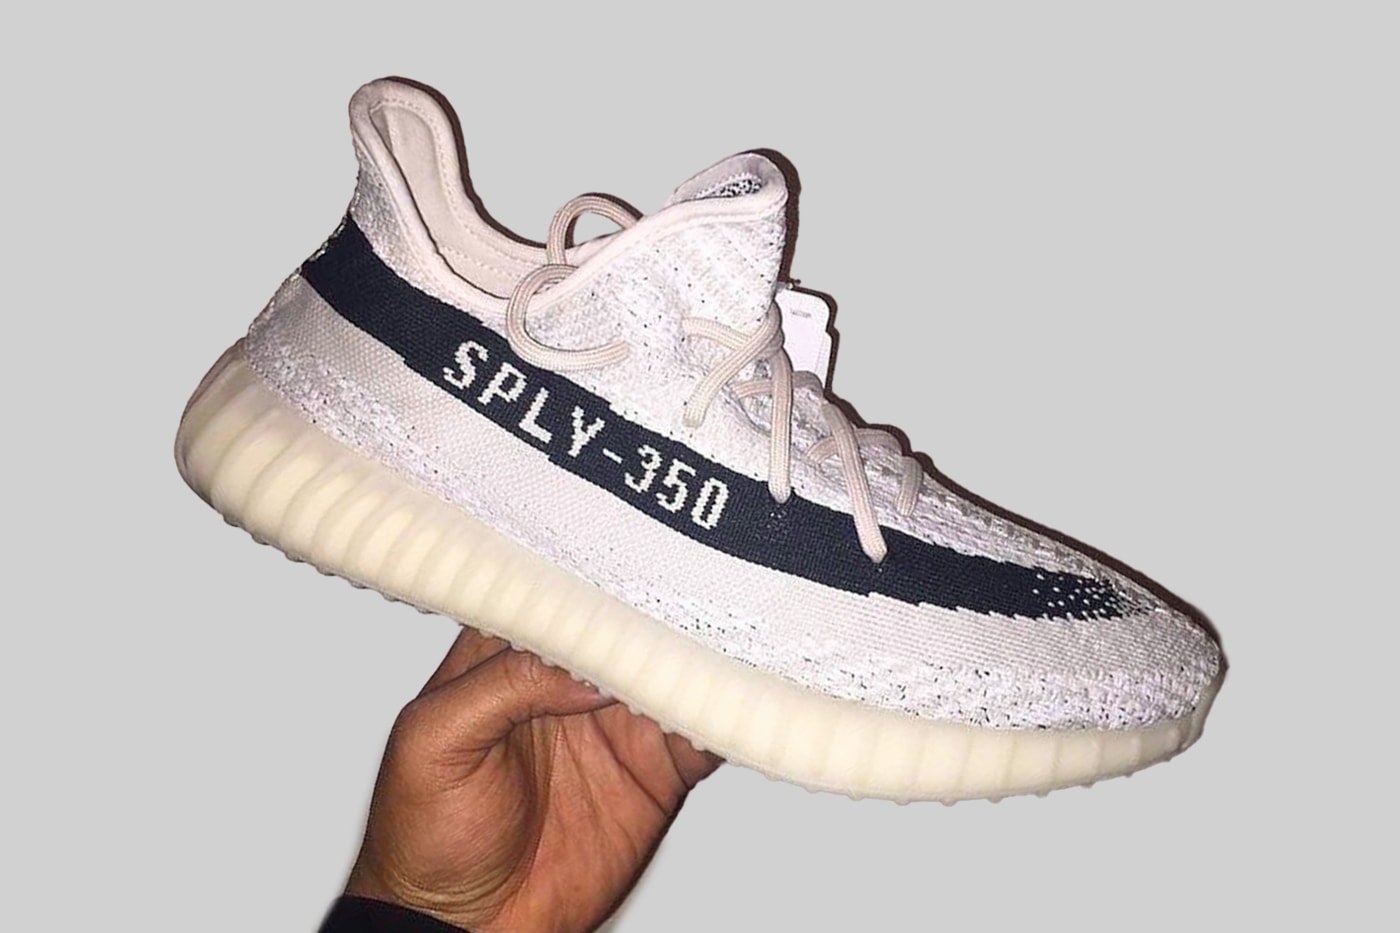 adidas YEEZY Boost 350 V2 Reverse Oreo First Look